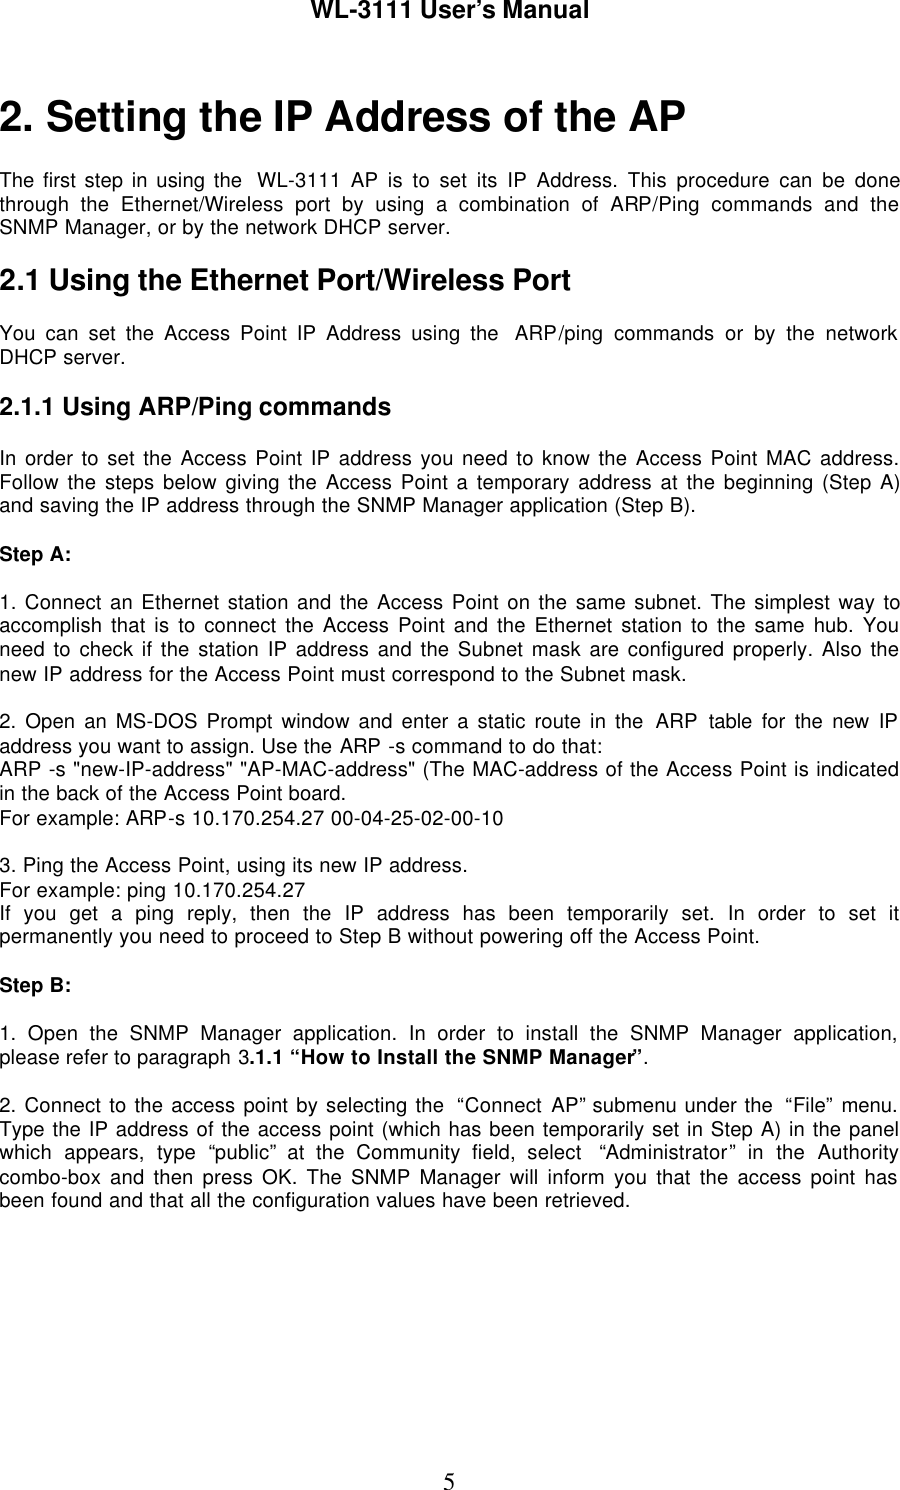 WL-3111 User’s Manual52. Setting the IP Address of the APThe first step in using the  WL-3111  AP is to set its IP Address. This procedure can be donethrough the Ethernet/Wireless port by using a combination of ARP/Ping commands and theSNMP Manager, or by the network DHCP server.2.1 Using the Ethernet Port/Wireless PortYou can set the Access Point IP Address using the  ARP/ping commands or by the networkDHCP server.2.1.1 Using ARP/Ping commandsIn order to set the Access Point IP address you need to know the Access Point MAC address.Follow the steps below giving the Access Point a temporary address at the beginning (Step A)and saving the IP address through the SNMP Manager application (Step B).Step A:1. Connect an Ethernet station and the Access Point on the same subnet. The simplest way toaccomplish that is to connect the Access Point and the Ethernet station to the same hub. Youneed to check if the station IP address and the Subnet mask are configured properly. Also thenew IP address for the Access Point must correspond to the Subnet mask.2. Open an MS-DOS Prompt window and enter a static route in the ARP table for the new IPaddress you want to assign. Use the ARP -s command to do that:ARP -s &quot;new-IP-address&quot; &quot;AP-MAC-address&quot; (The MAC-address of the Access Point is indicatedin the back of the Access Point board.For example: ARP-s 10.170.254.27 00-04-25-02-00-103. Ping the Access Point, using its new IP address.For example: ping 10.170.254.27If you get a ping reply, then the IP address has been temporarily set. In order to set itpermanently you need to proceed to Step B without powering off the Access Point.Step B:1. Open the SNMP Manager application. In order to install the SNMP Manager application,please refer to paragraph 3.1.1 “How to Install the SNMP Manager”.2. Connect to the access point by selecting the  “Connect AP” submenu under the  “File” menu.Type the IP address of the access point (which has been temporarily set in Step A) in the panelwhich appears, type “public” at the Community field, select  “Administrator” in the Authoritycombo-box and then press OK. The SNMP Manager will inform you that the access point hasbeen found and that all the configuration values have been retrieved.